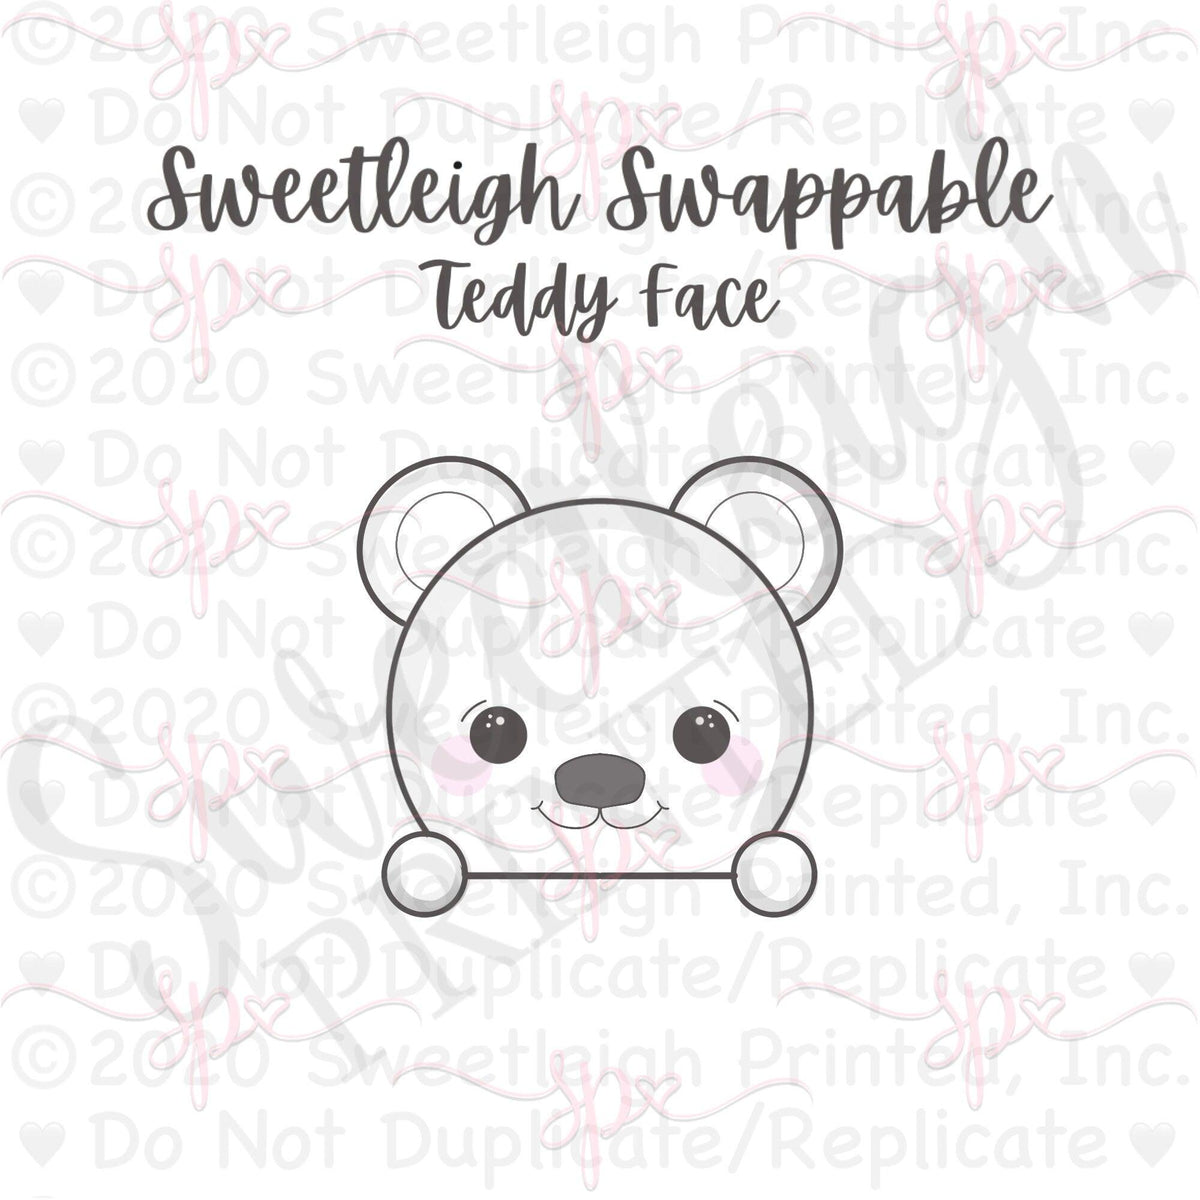 Sweetleigh Swappable Teddy Face Cookie Cutter - Sweetleigh 